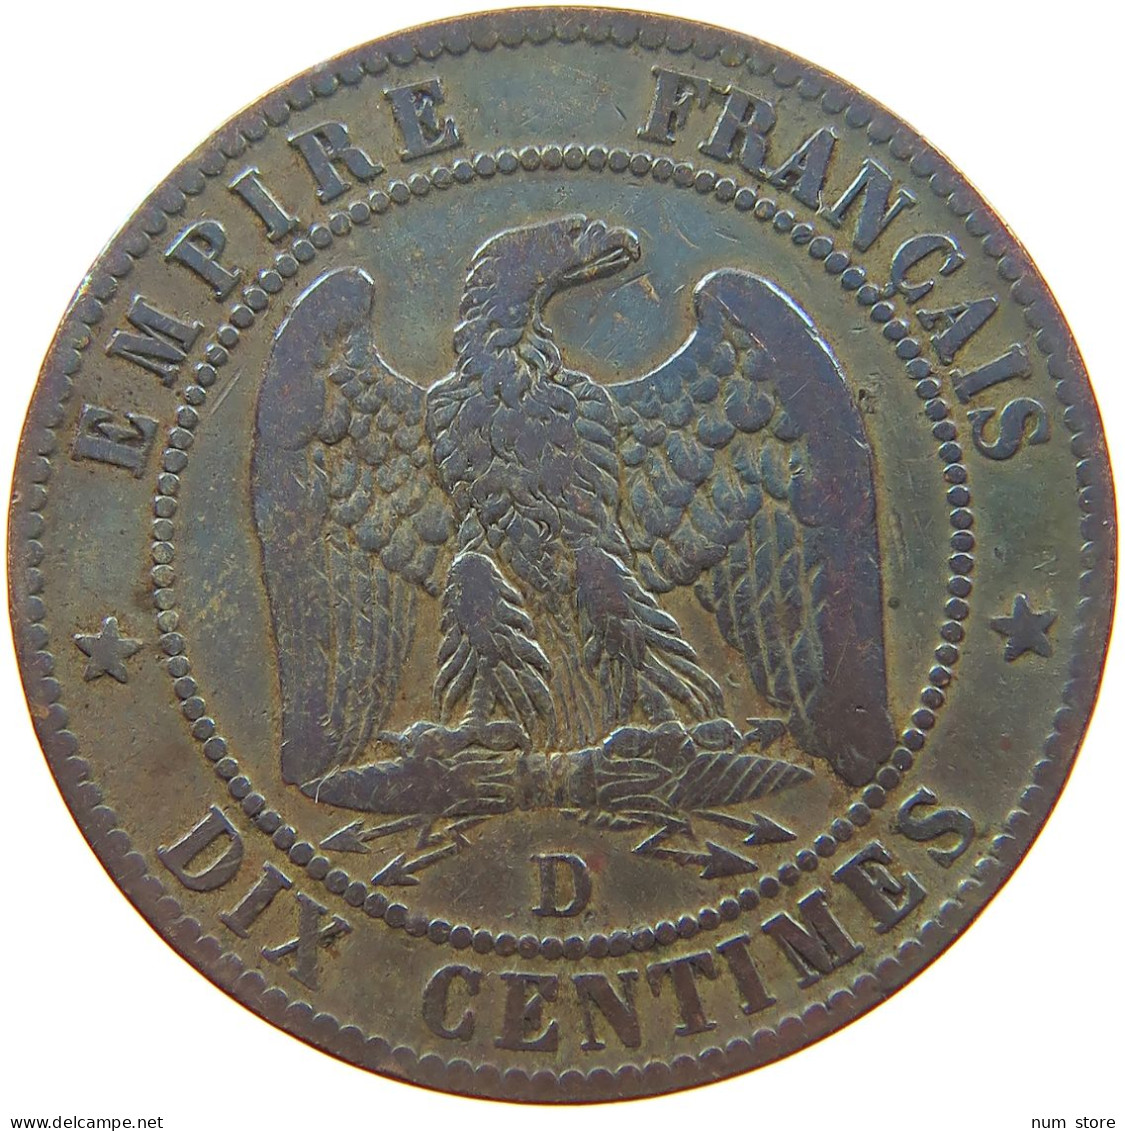 FRANCE 10 CENTIMES 1854 D NAPOLEON III. (1852-1870) #MA 101891 - 10 Centimes